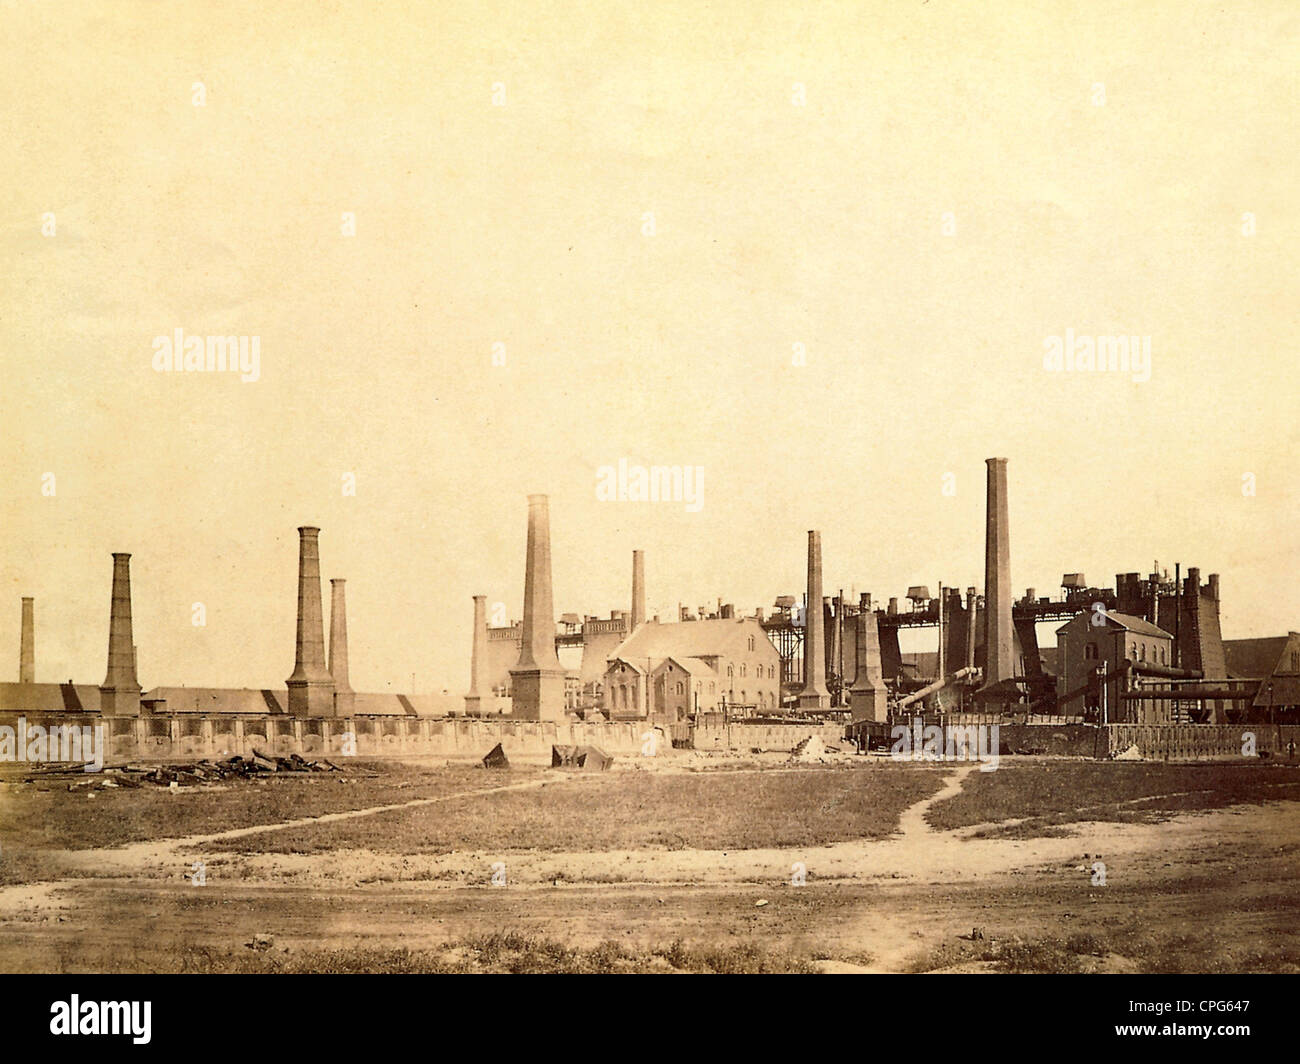 industry, metal industry, Jacobi, Haniel und Huyssen, smeltery, ironworks, Oberhausen, Germany, photograph by Hermann Günther, circa 1865, Additional-Rights-Clearences-Not Available Stock Photo